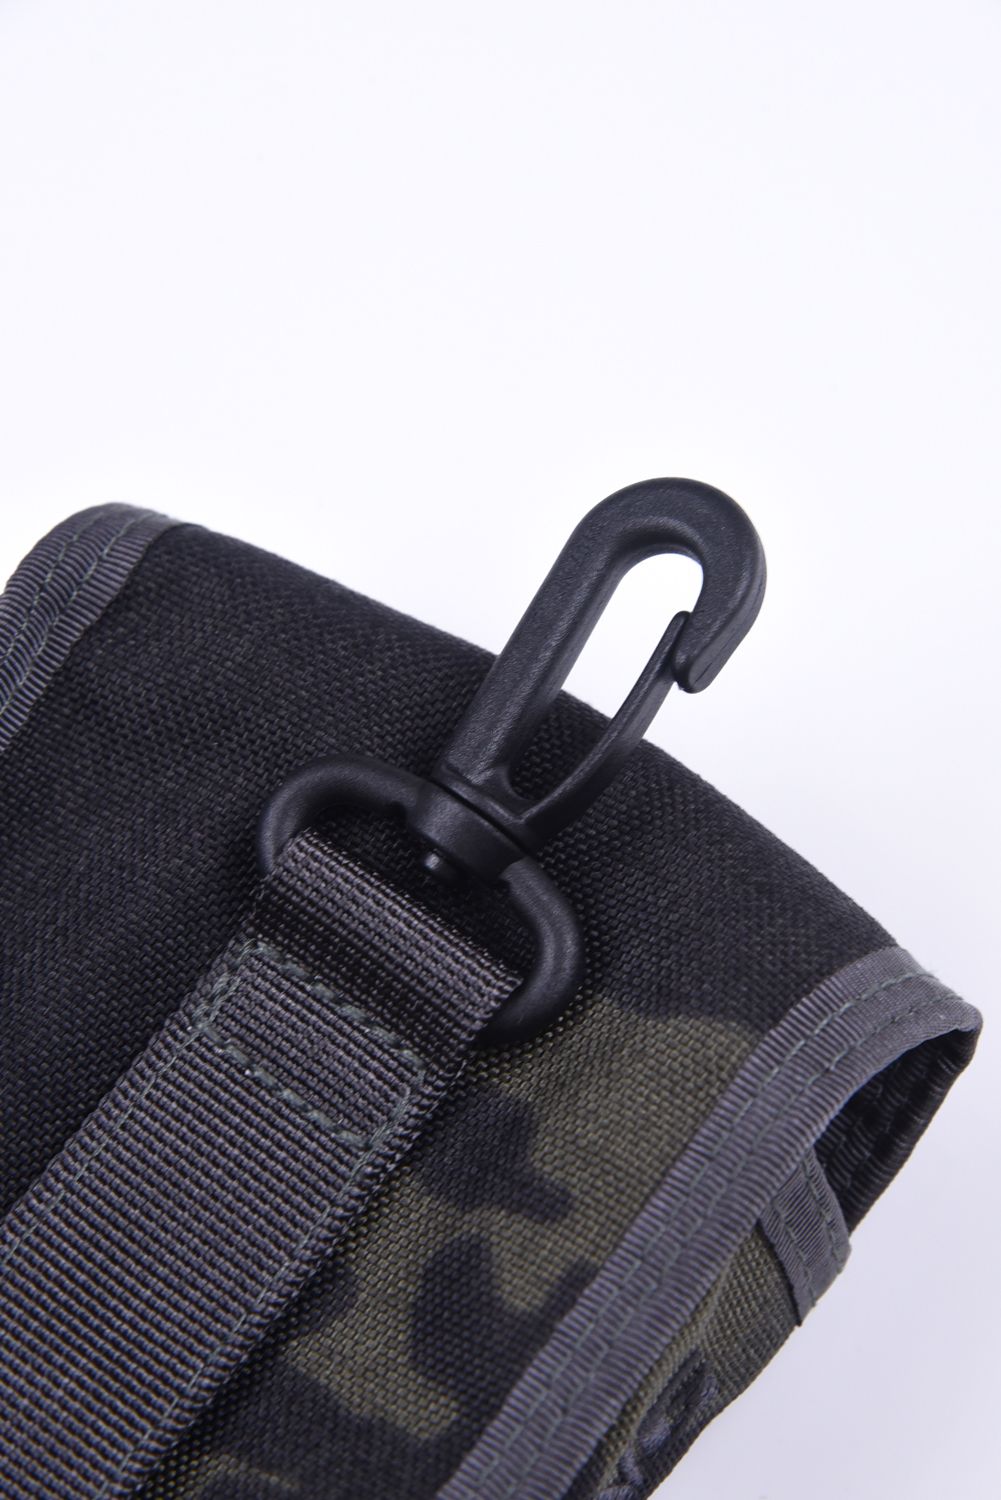 BRIEFING - 【1000Dコーデュラナイロン】 SCOPE BOX POUCH / スコープ 